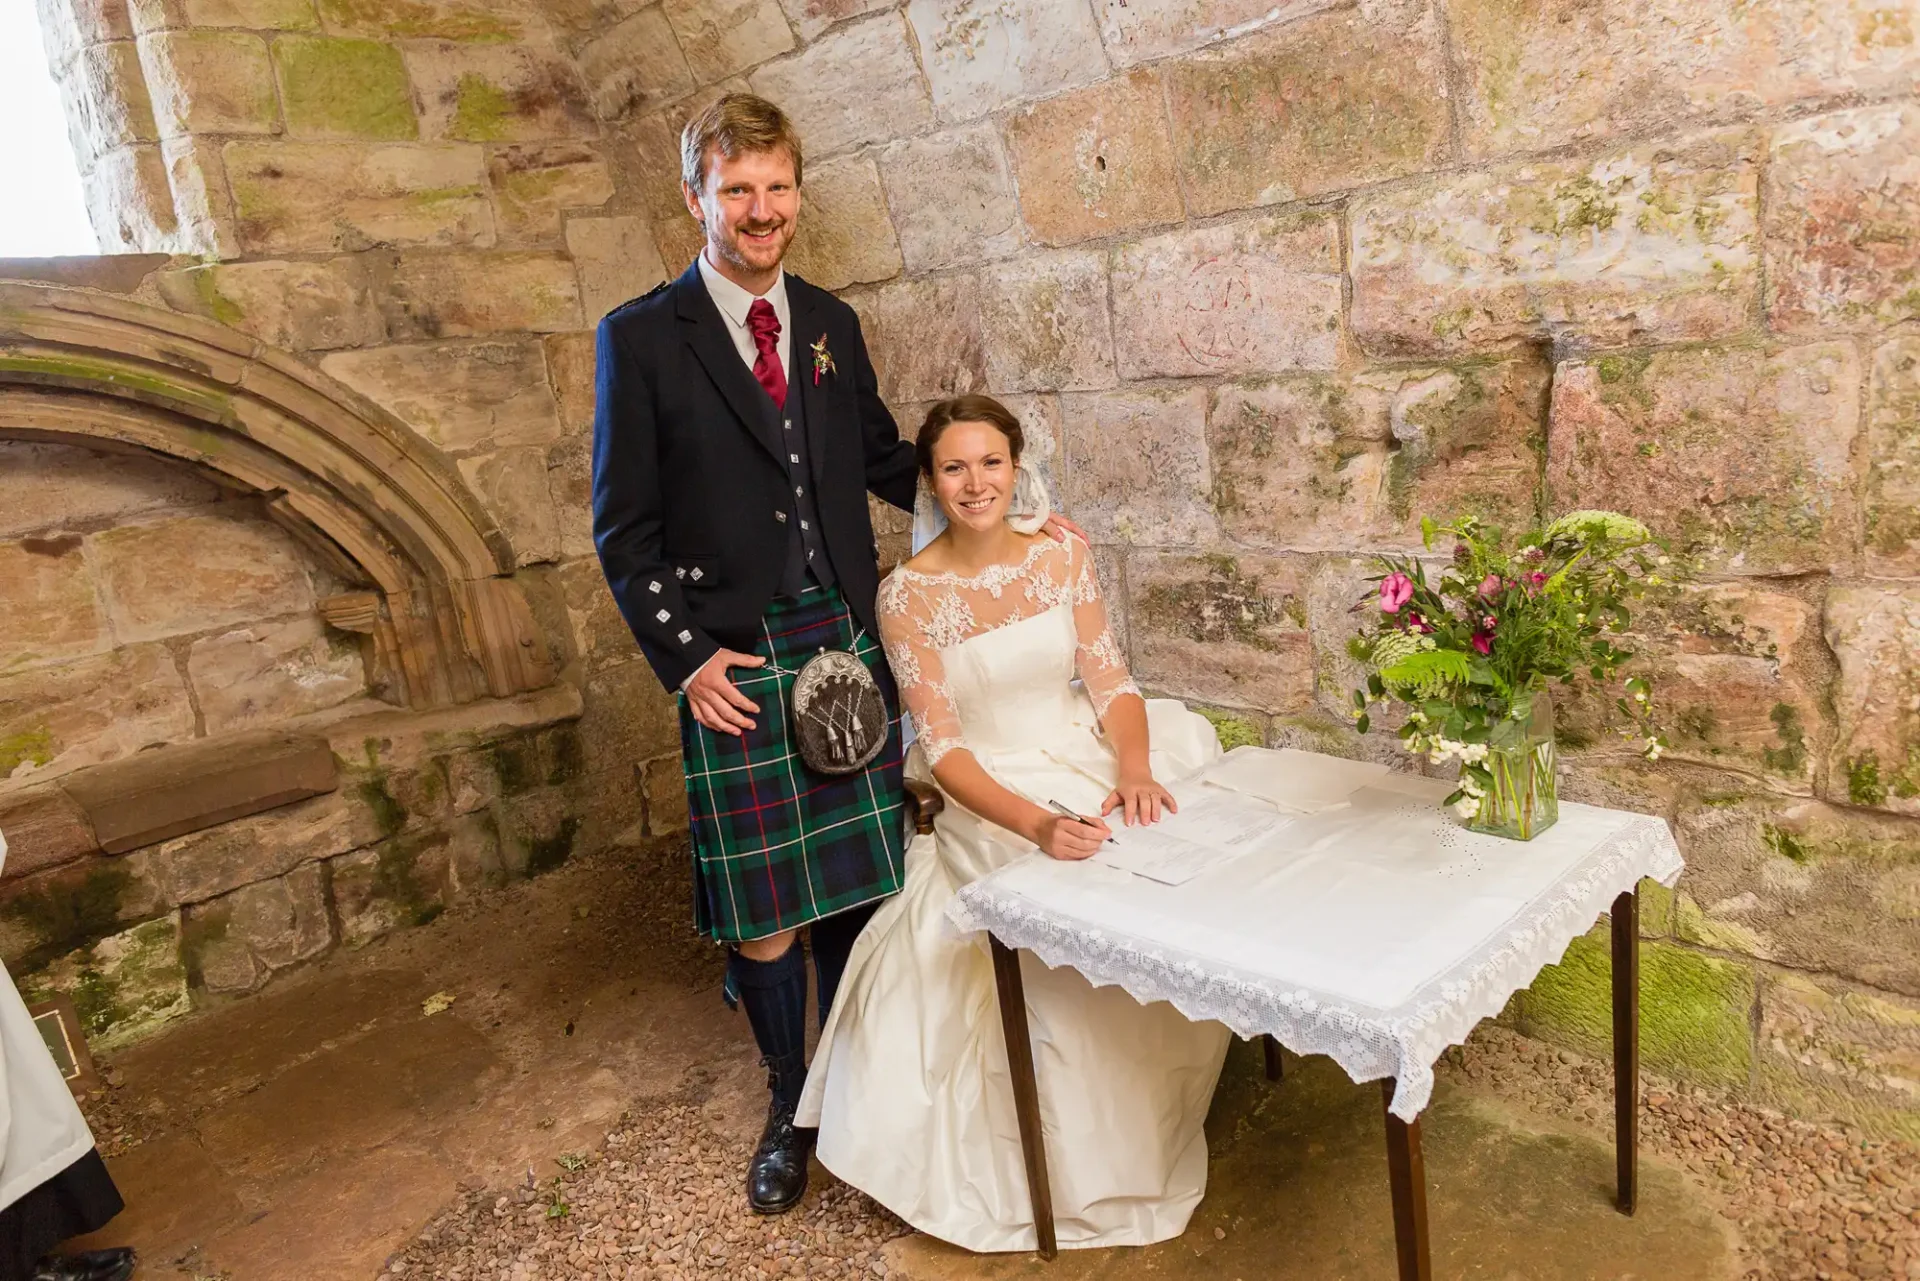 A smiling bride and groom in traditional scottish attire pose beside a stone wall and under an arched window, with a small floral arrangement on a table next to them.